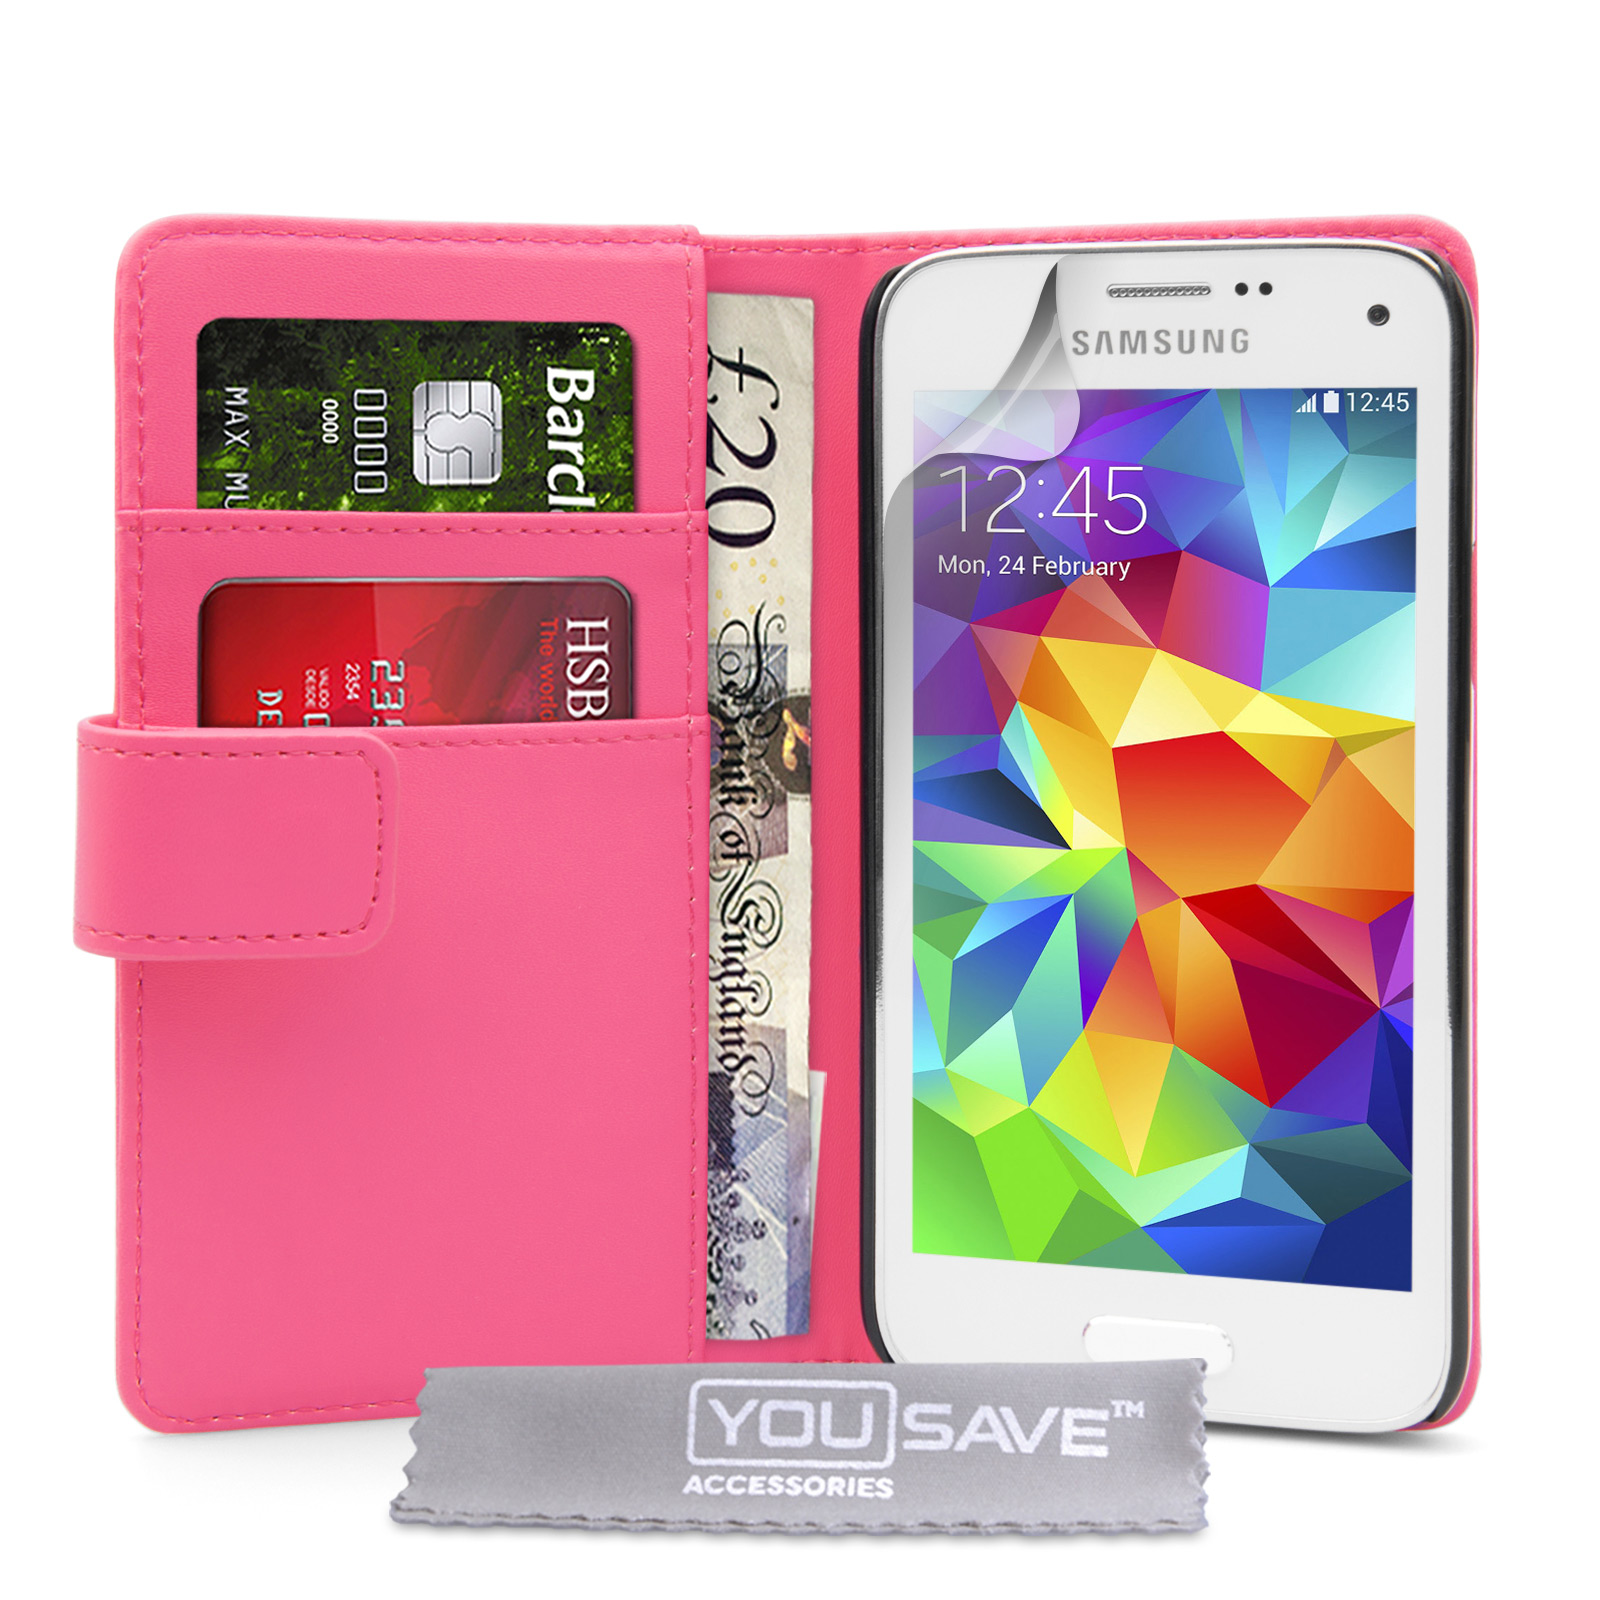 YouSave Samsung Galaxy S5 Mini Leather-Effect Wallet Case - Hot Pink